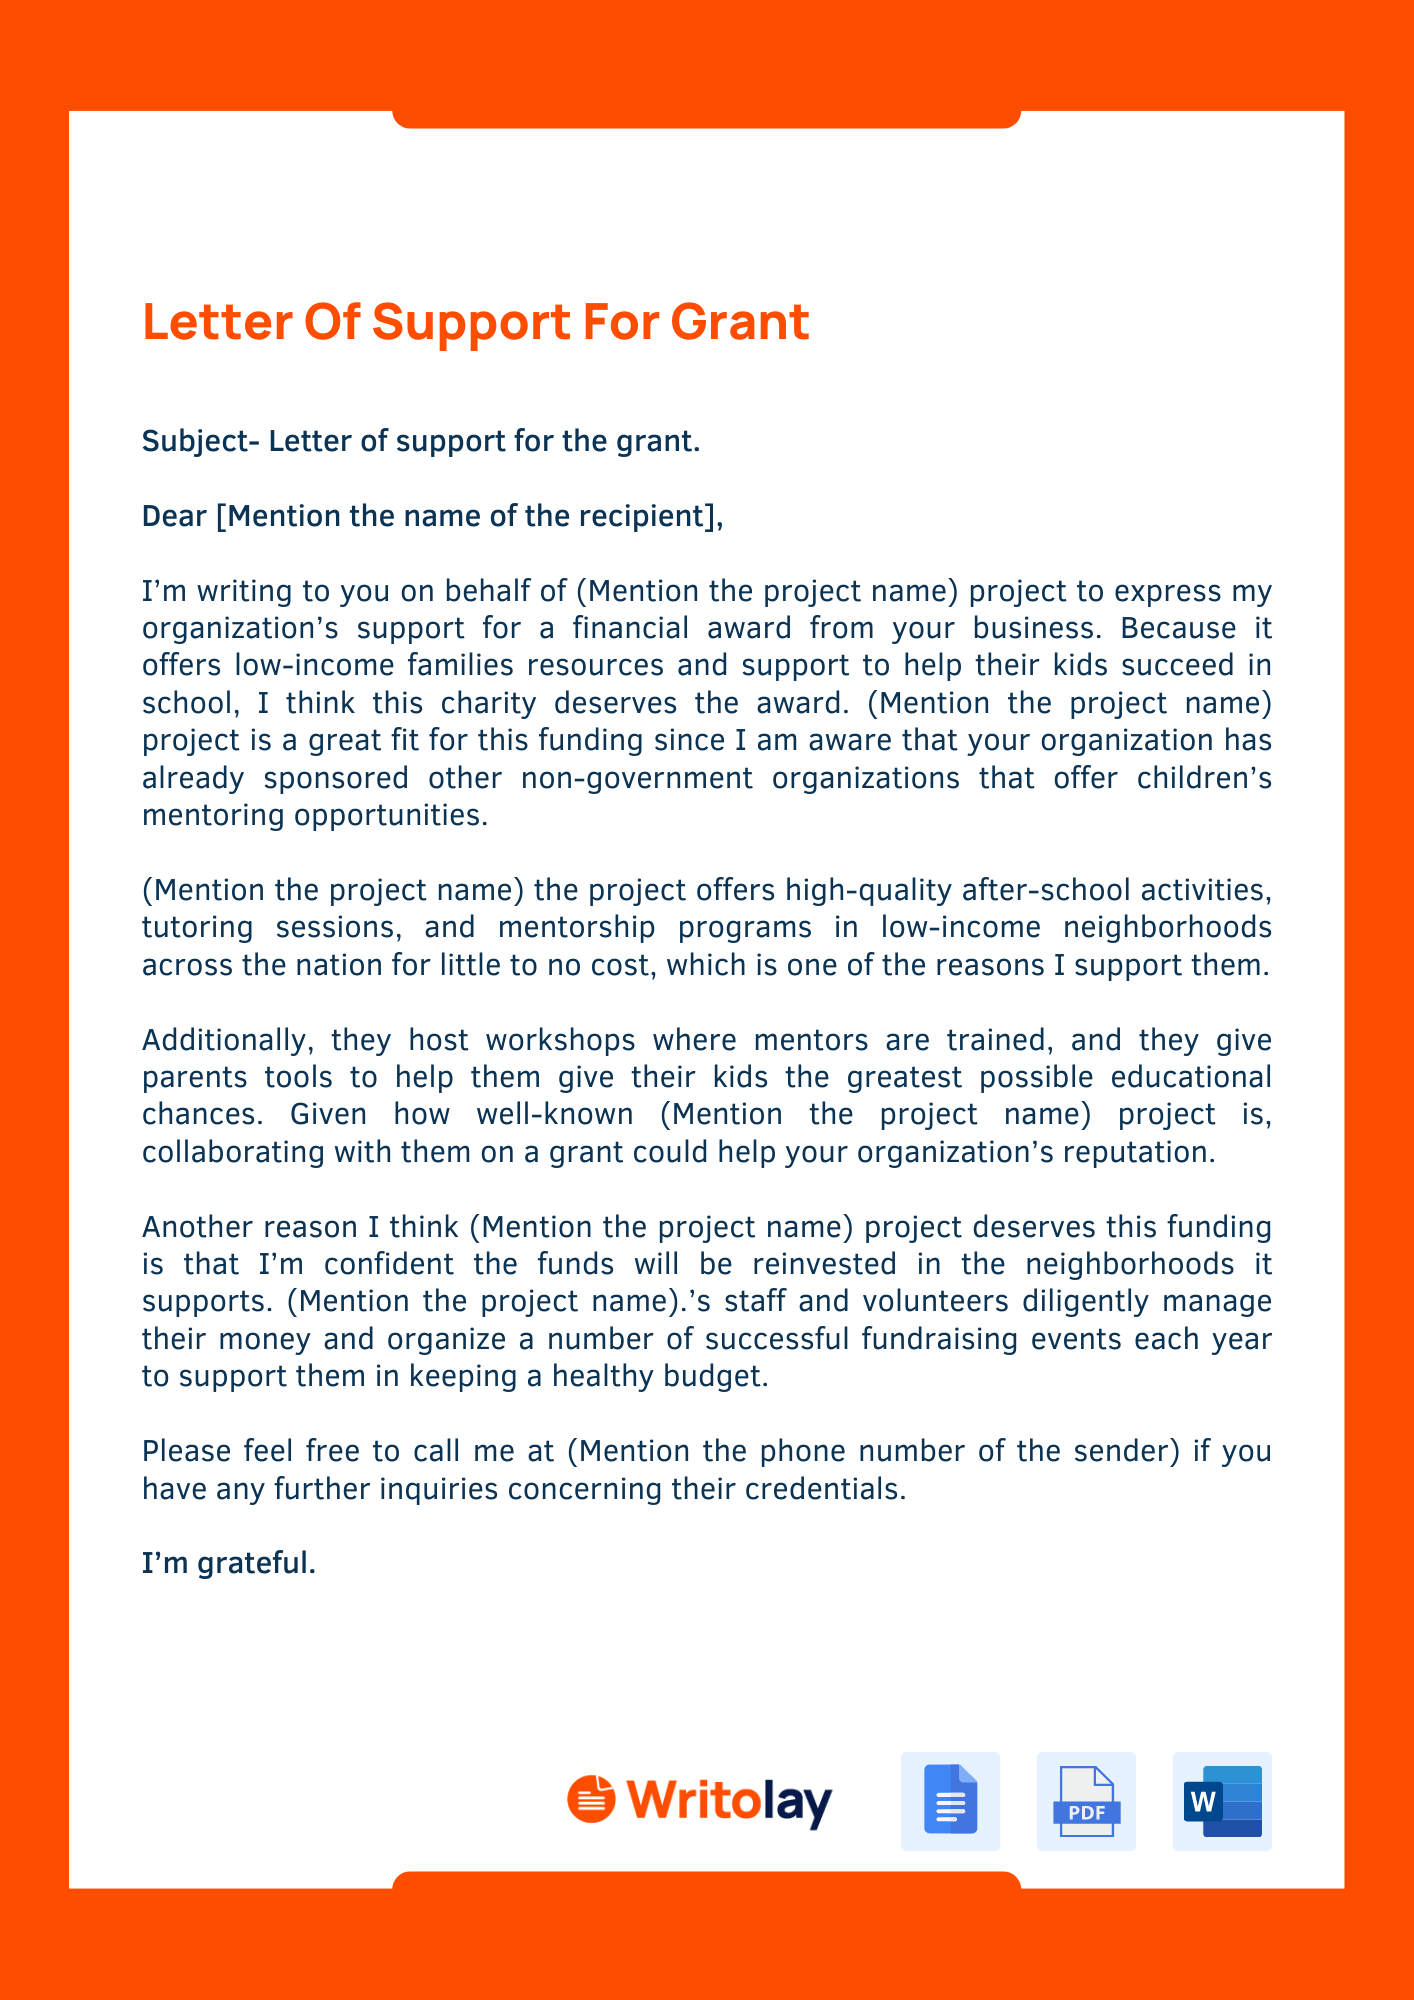 Letter of Support for Grant: 4 Templates Writolay